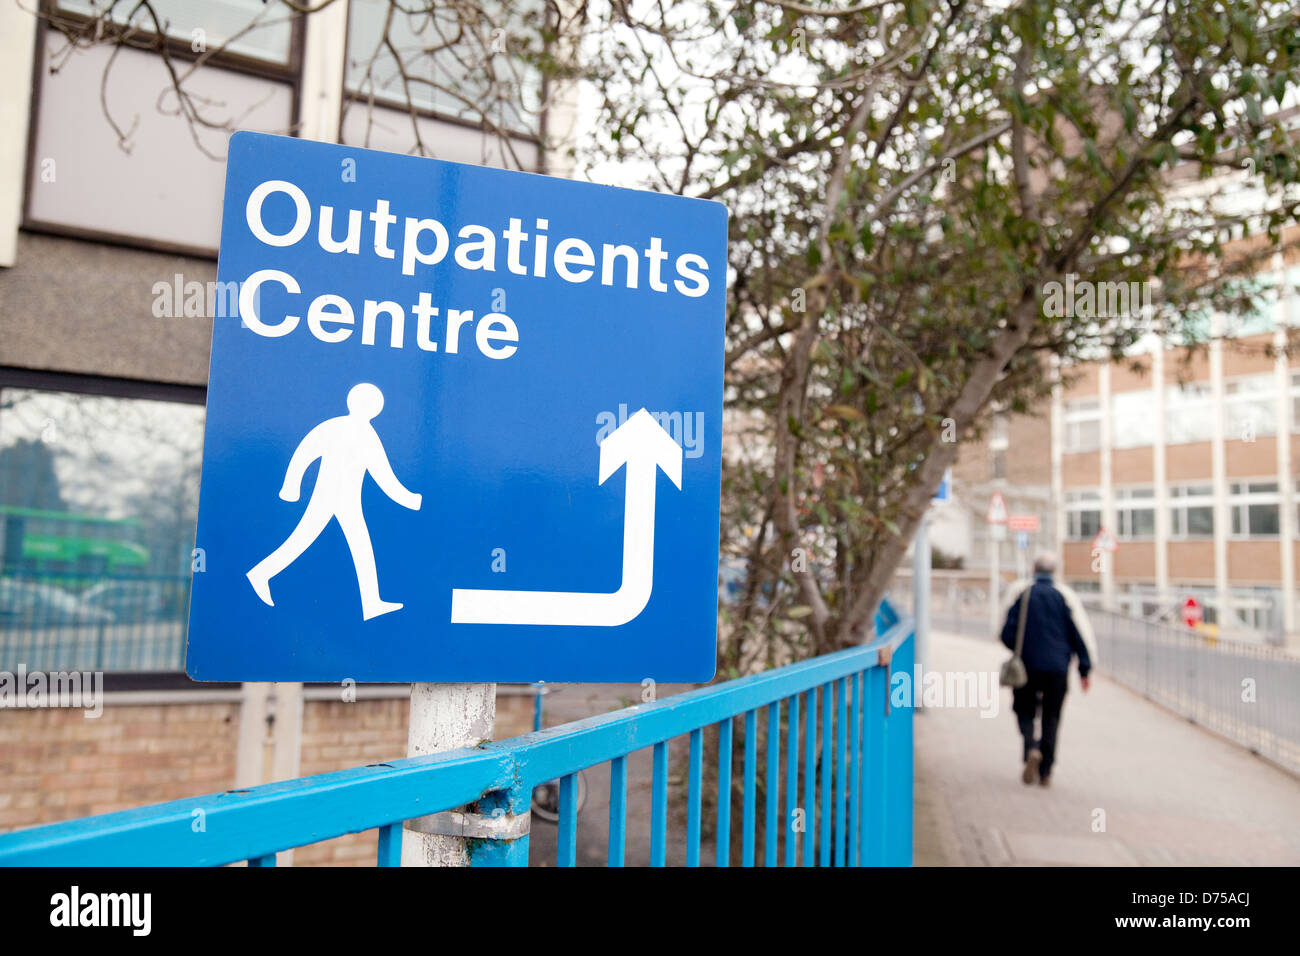 Outpatients Centre, sign for the NHS outpatient clinic, Addenbrookes Hospital cambridge UK Stock Photo